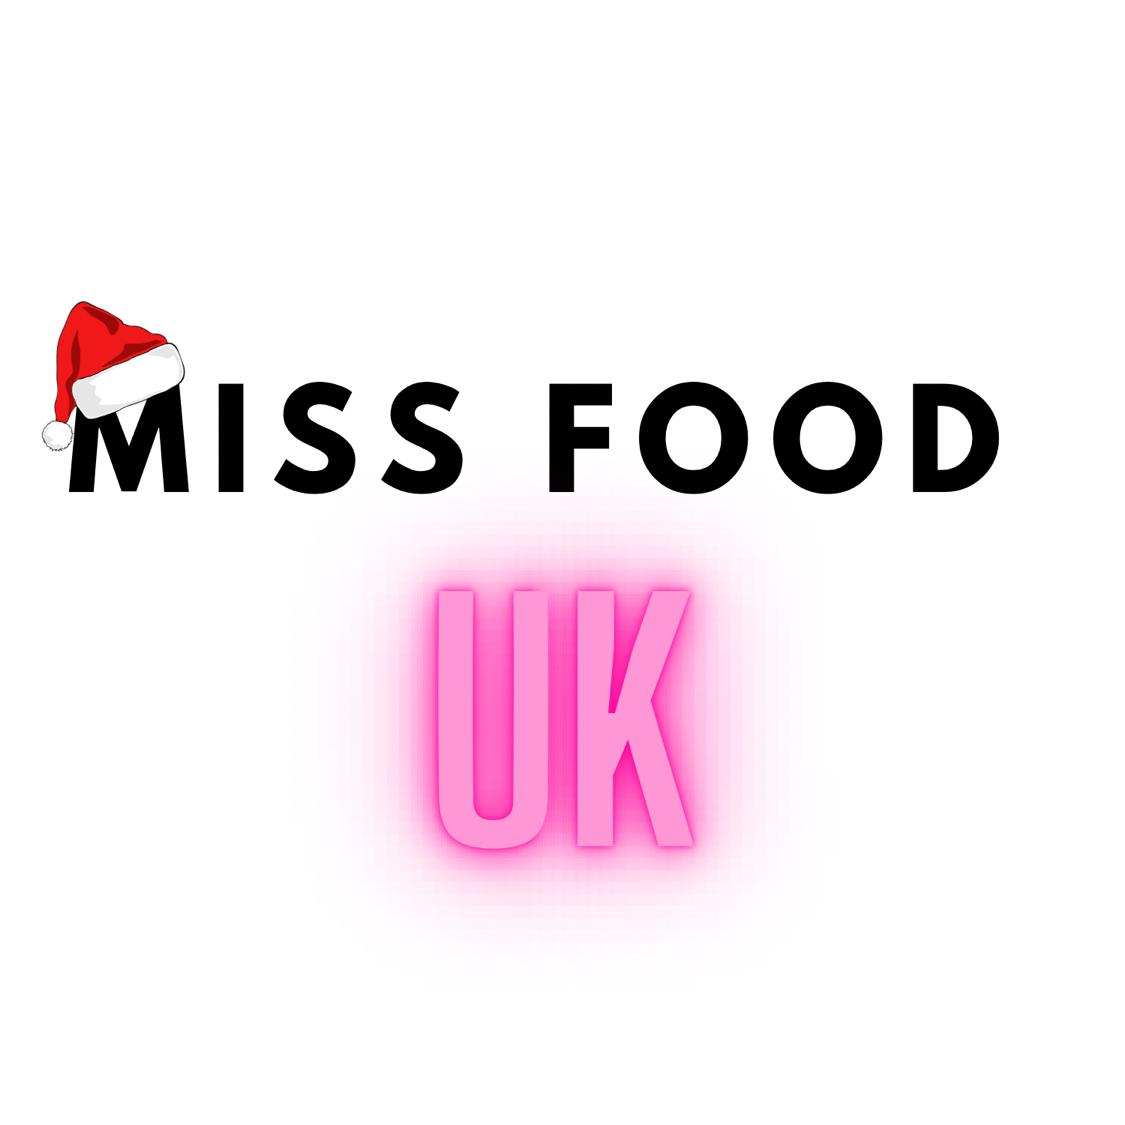 Miss Food UK's images